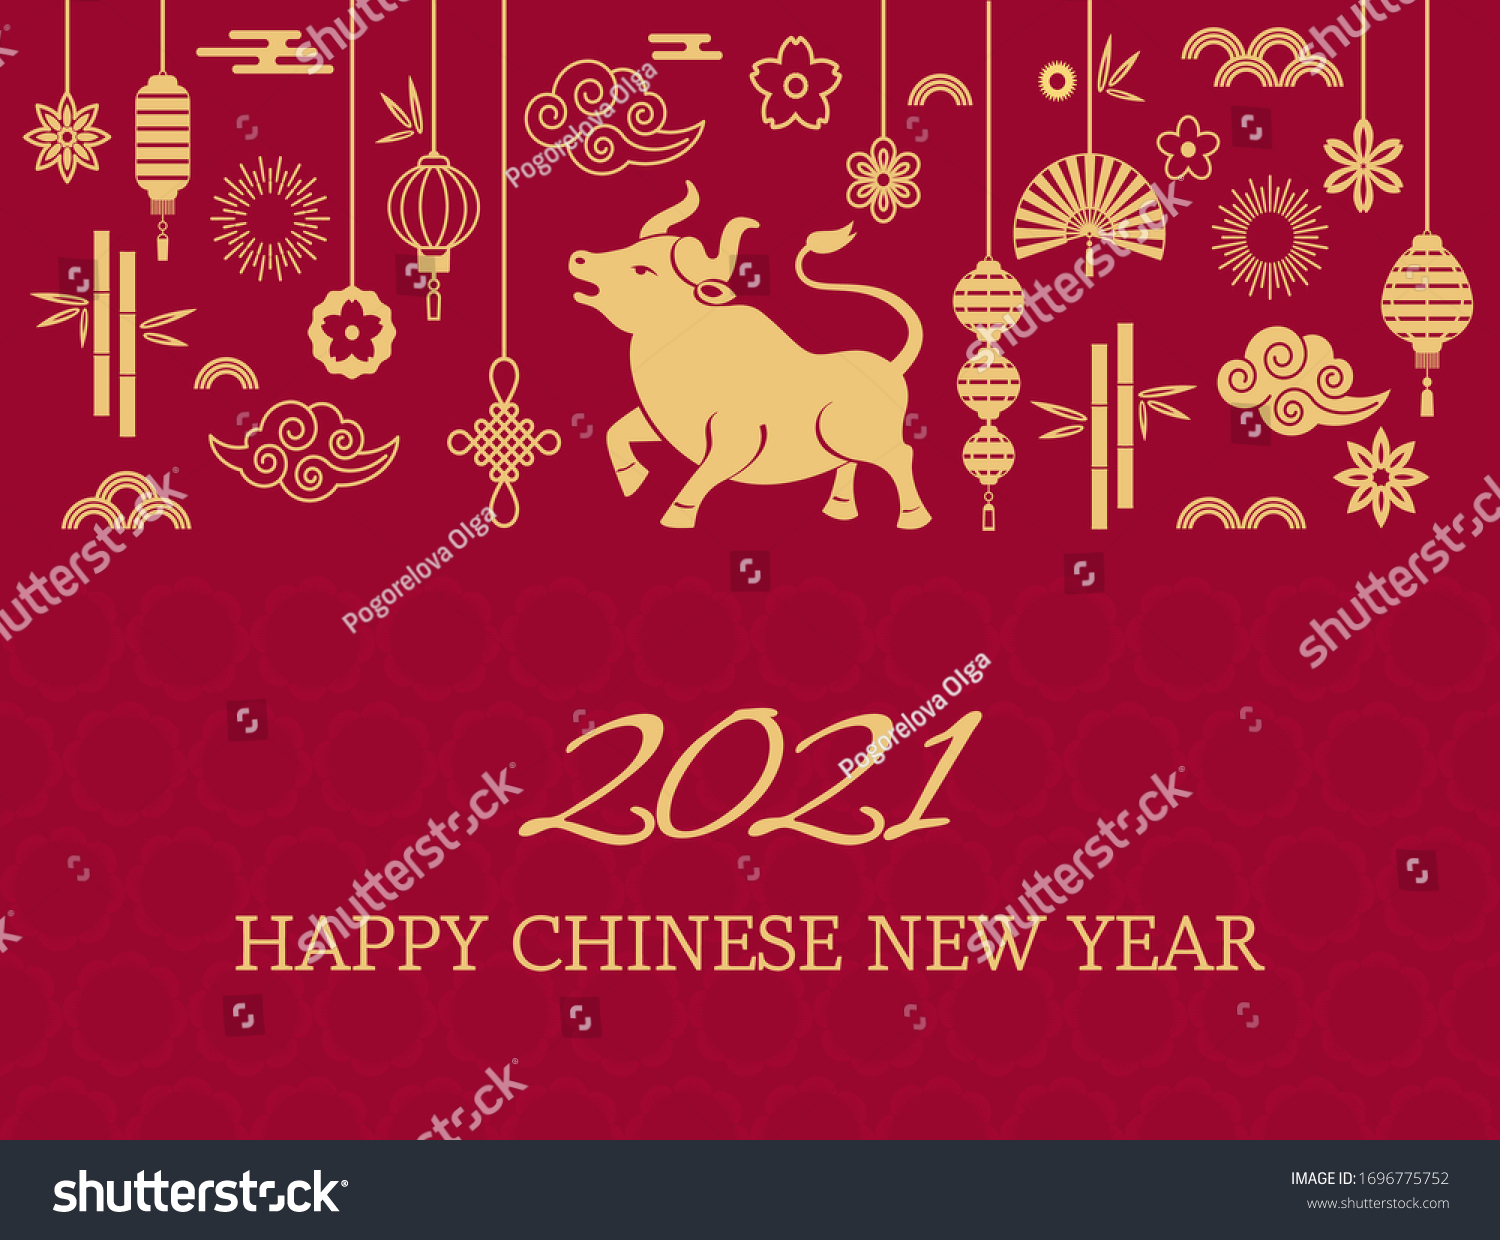 Happy Chinese New Year Template